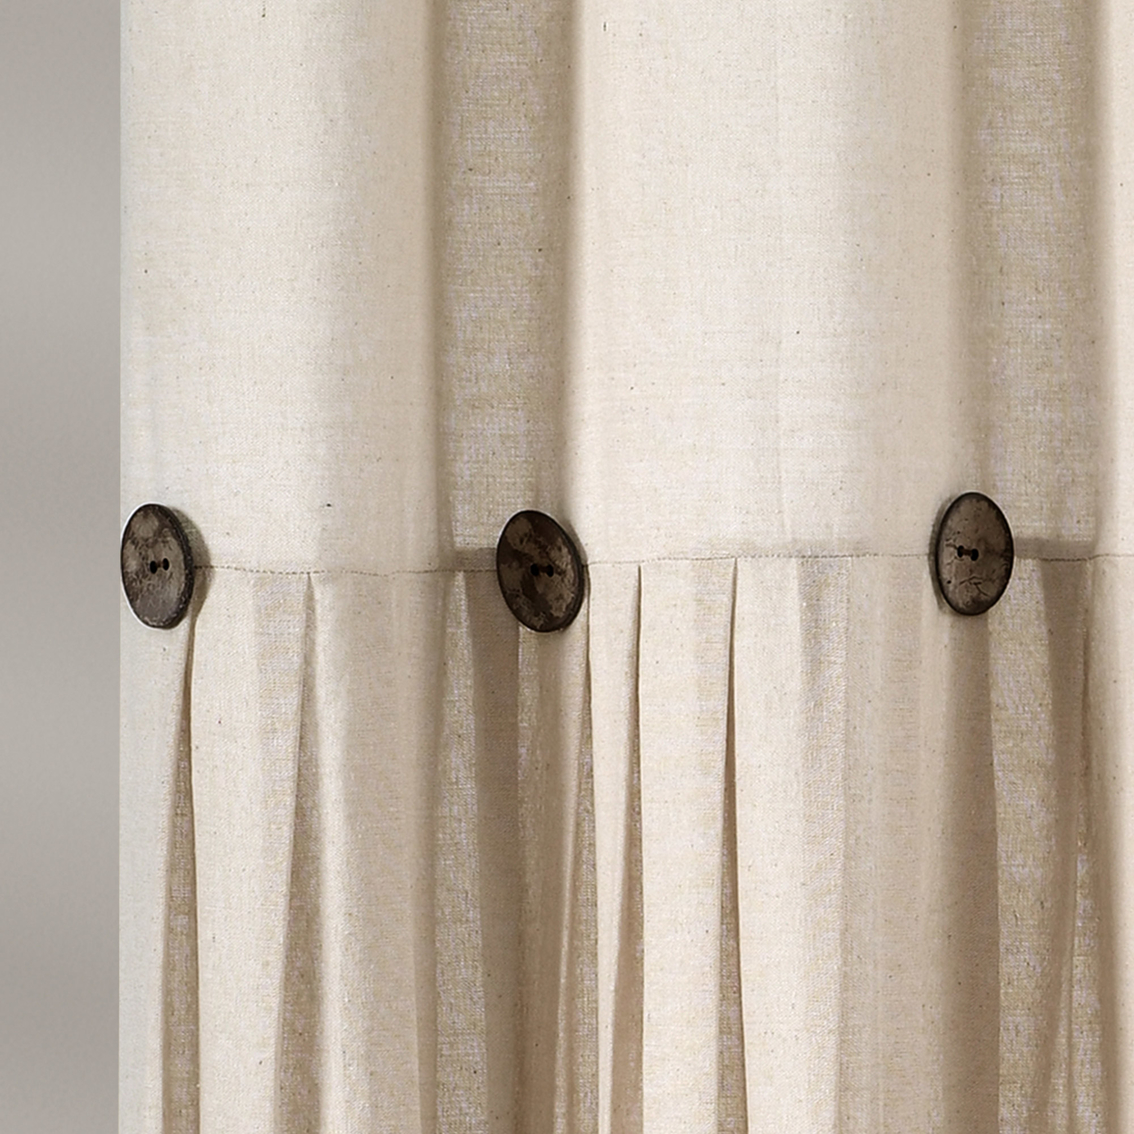 Lush Decor Linen Button Single Shower Curtain 72 x 72 in. - Image 3 of 7